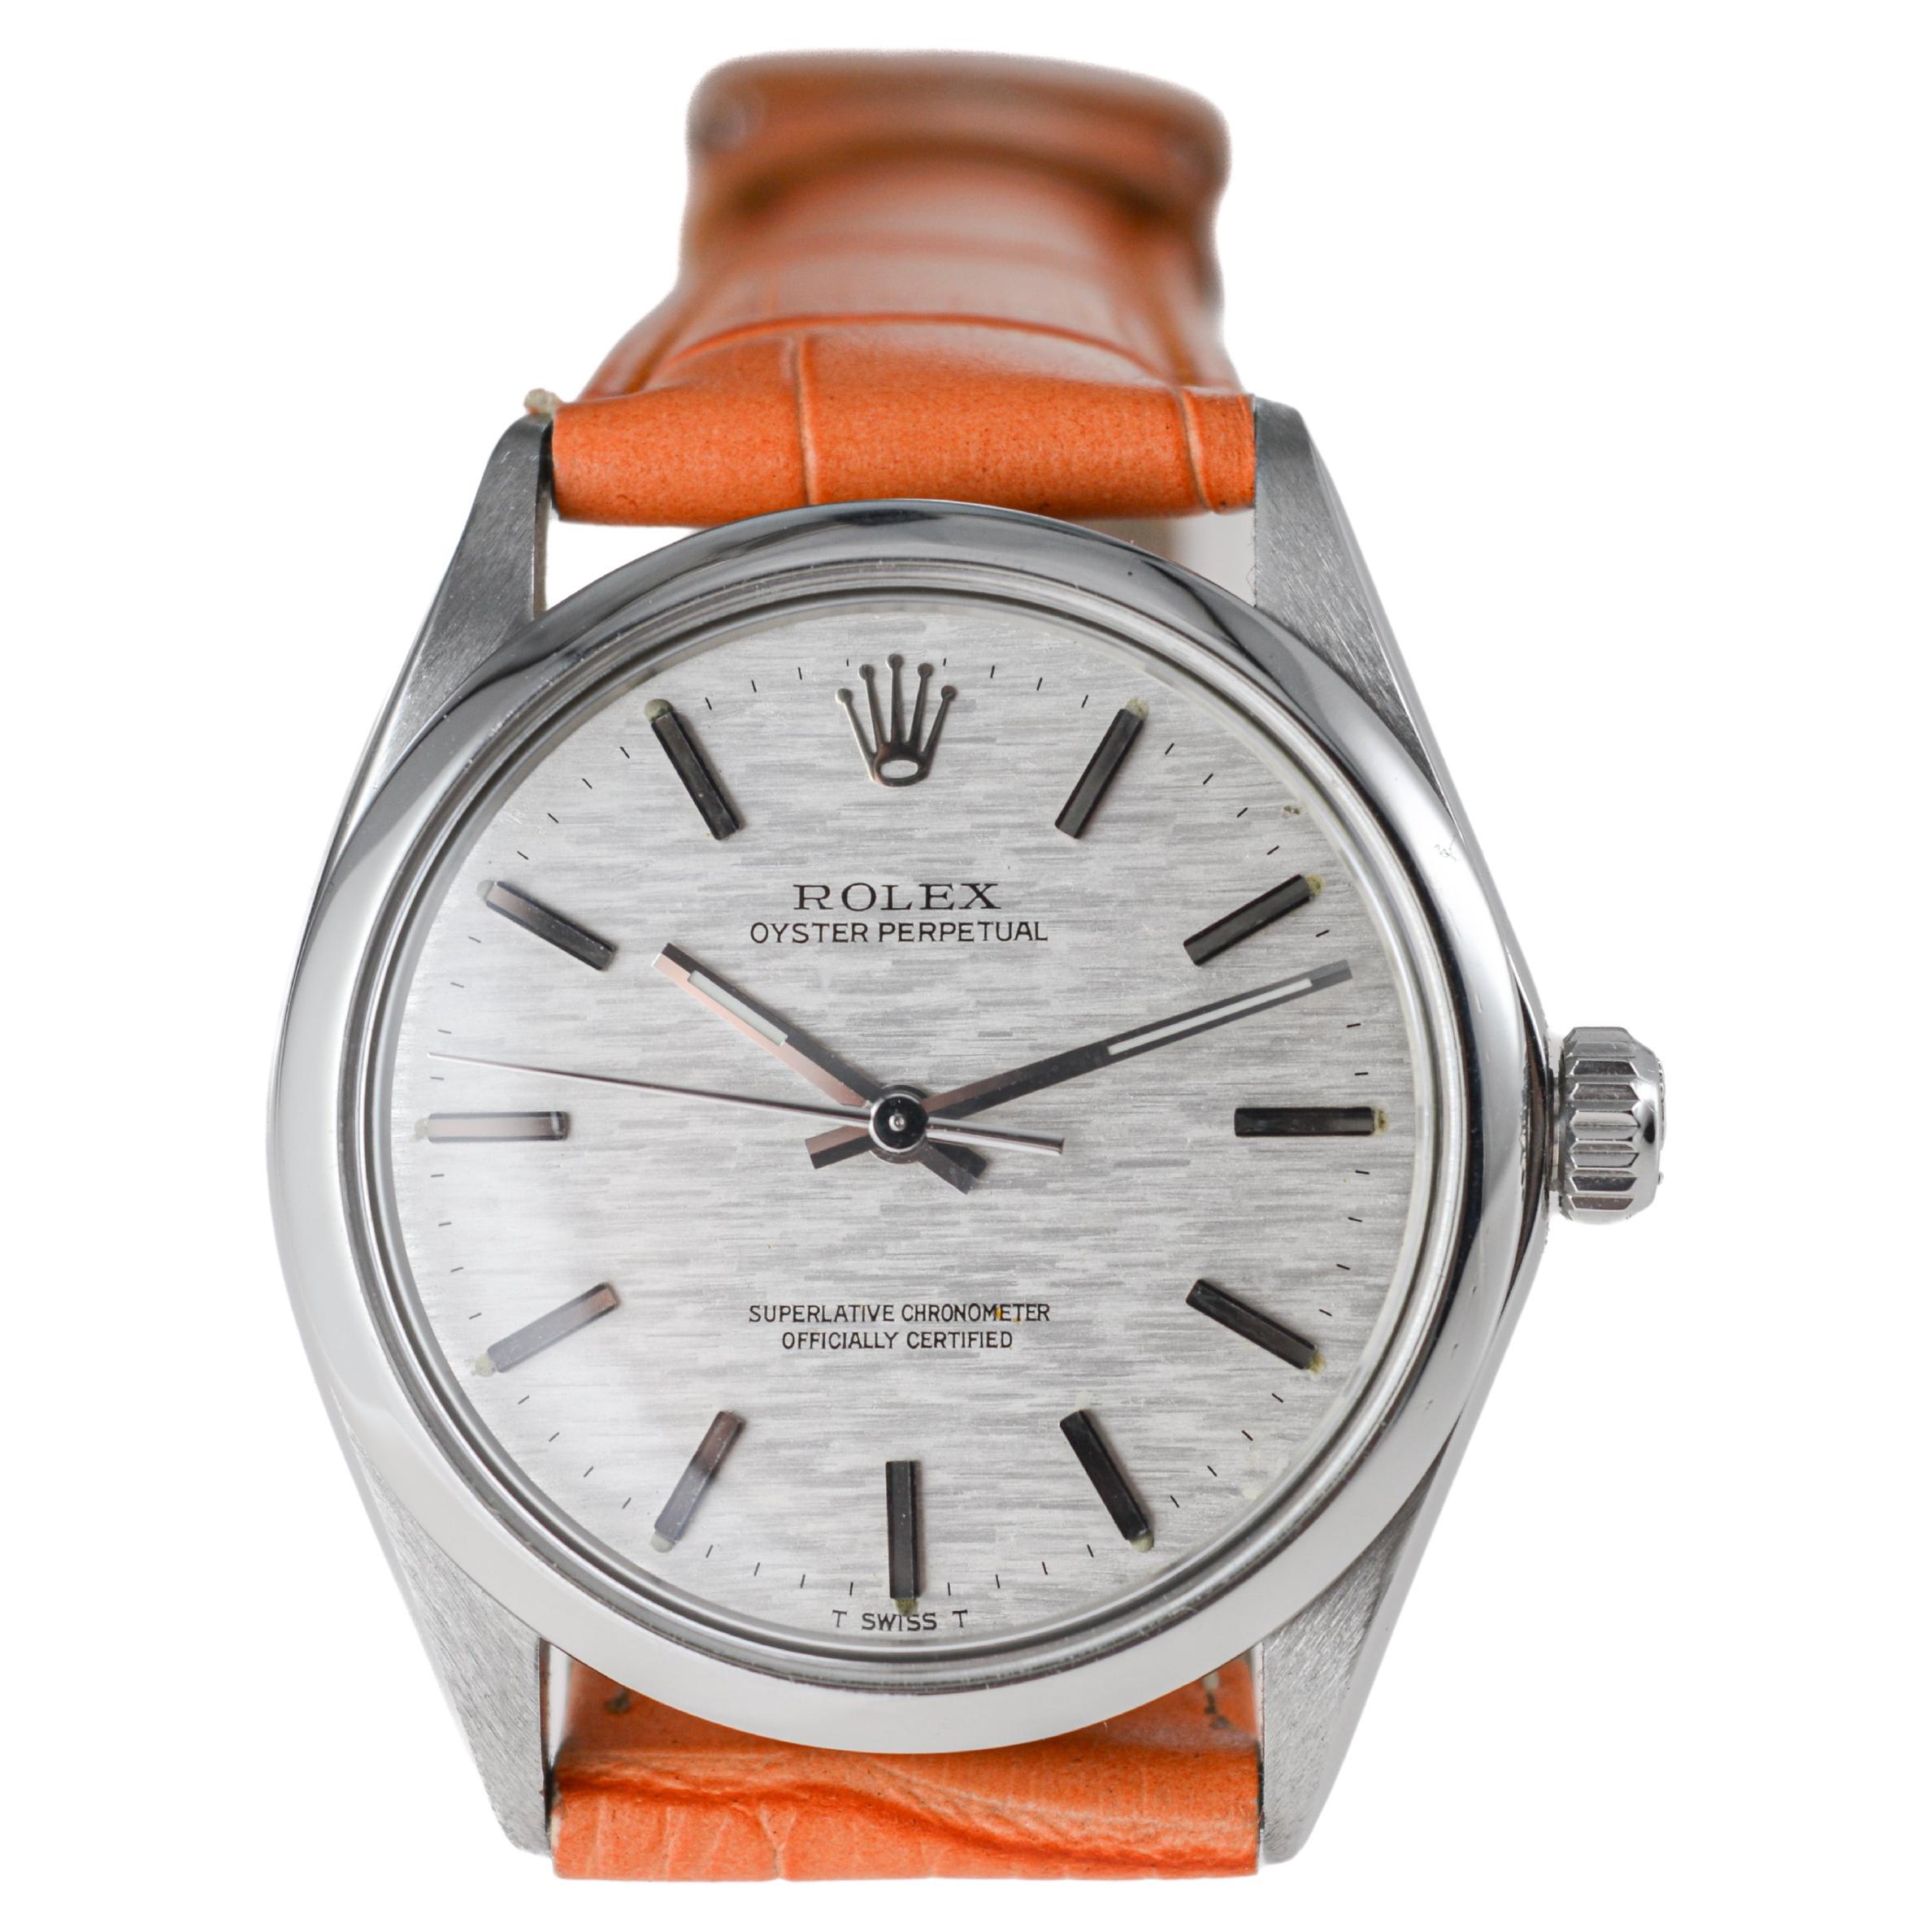 Rolex Steel Oyster Perpetual with Factory Original Mosaic Dial circa 1973 / 74 For Sale 2